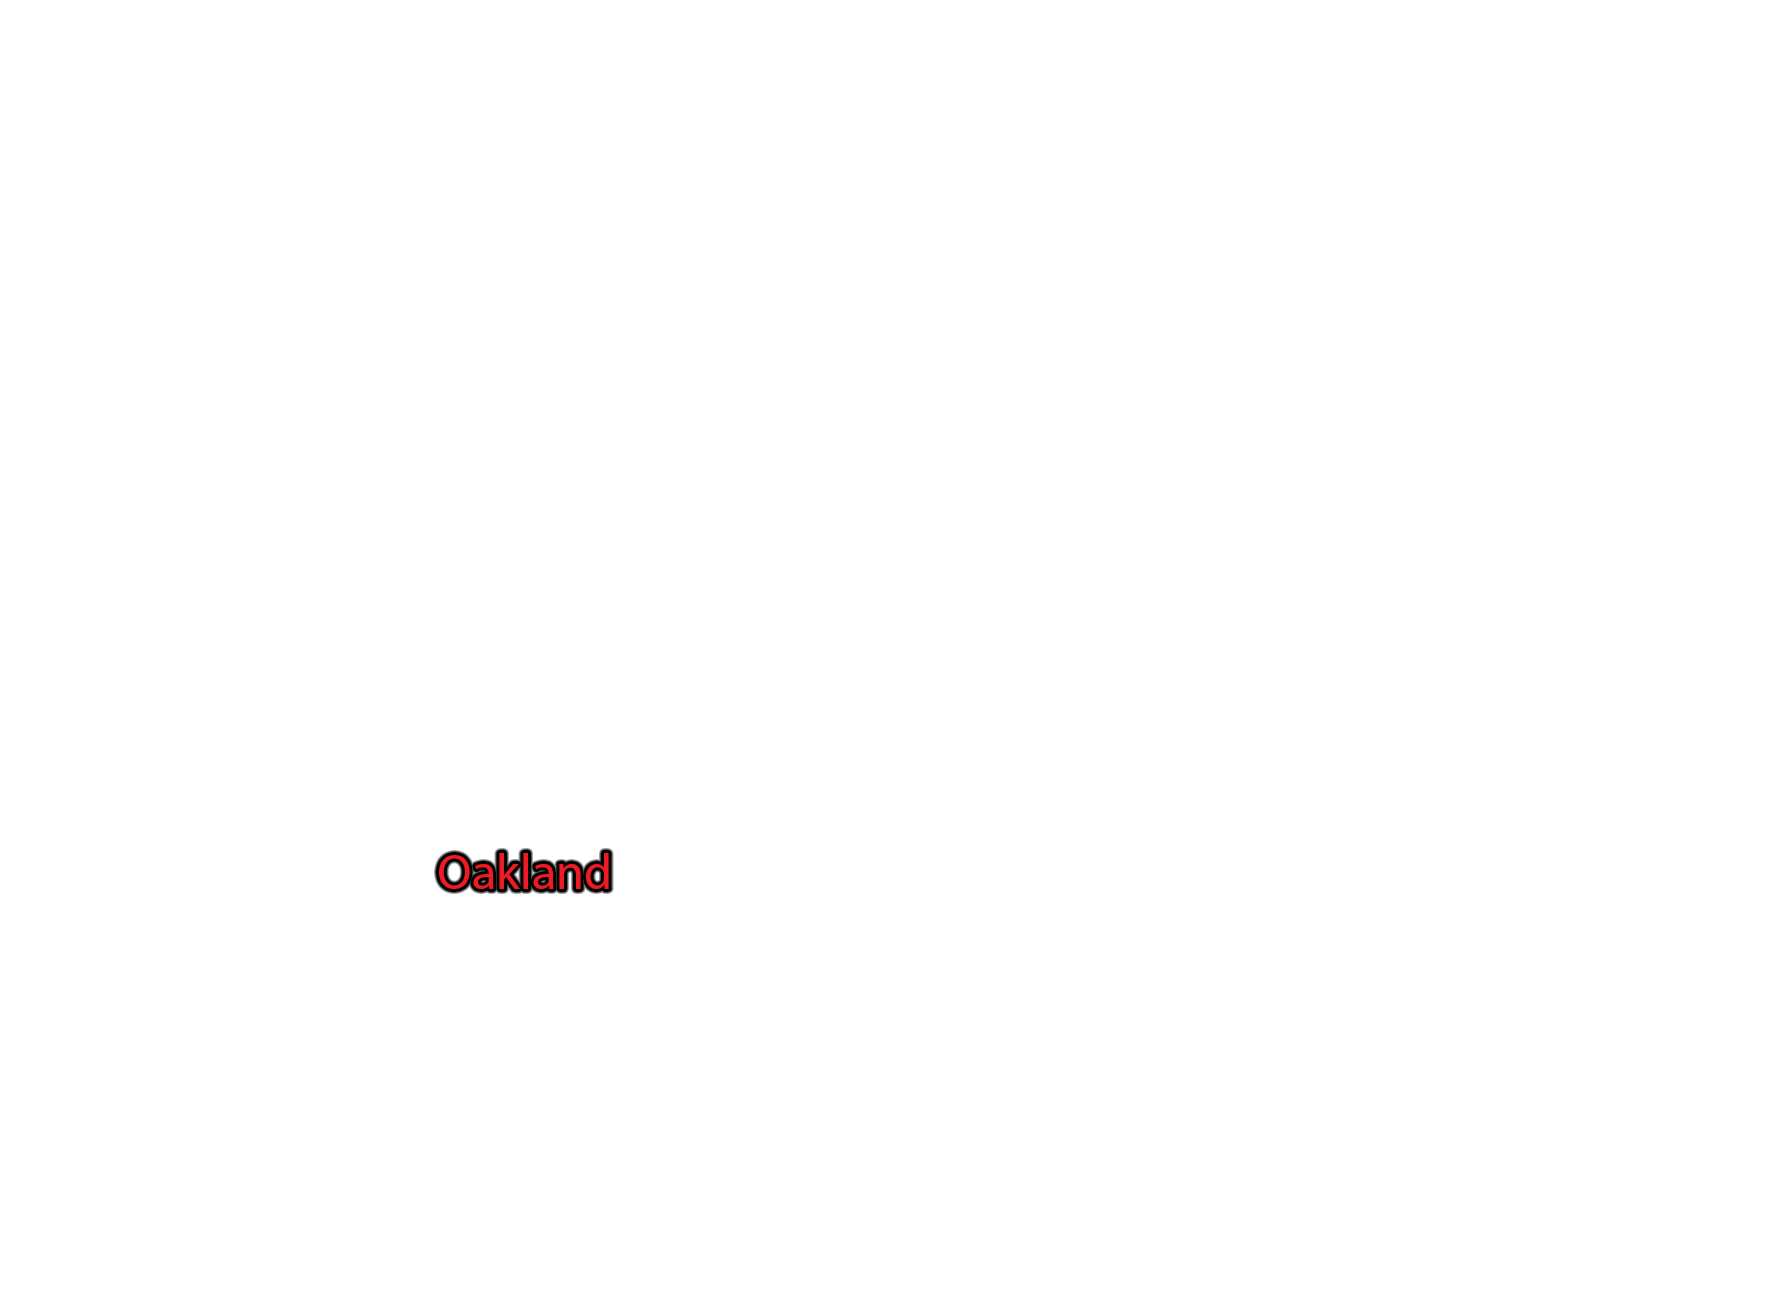 Oakland label with glow